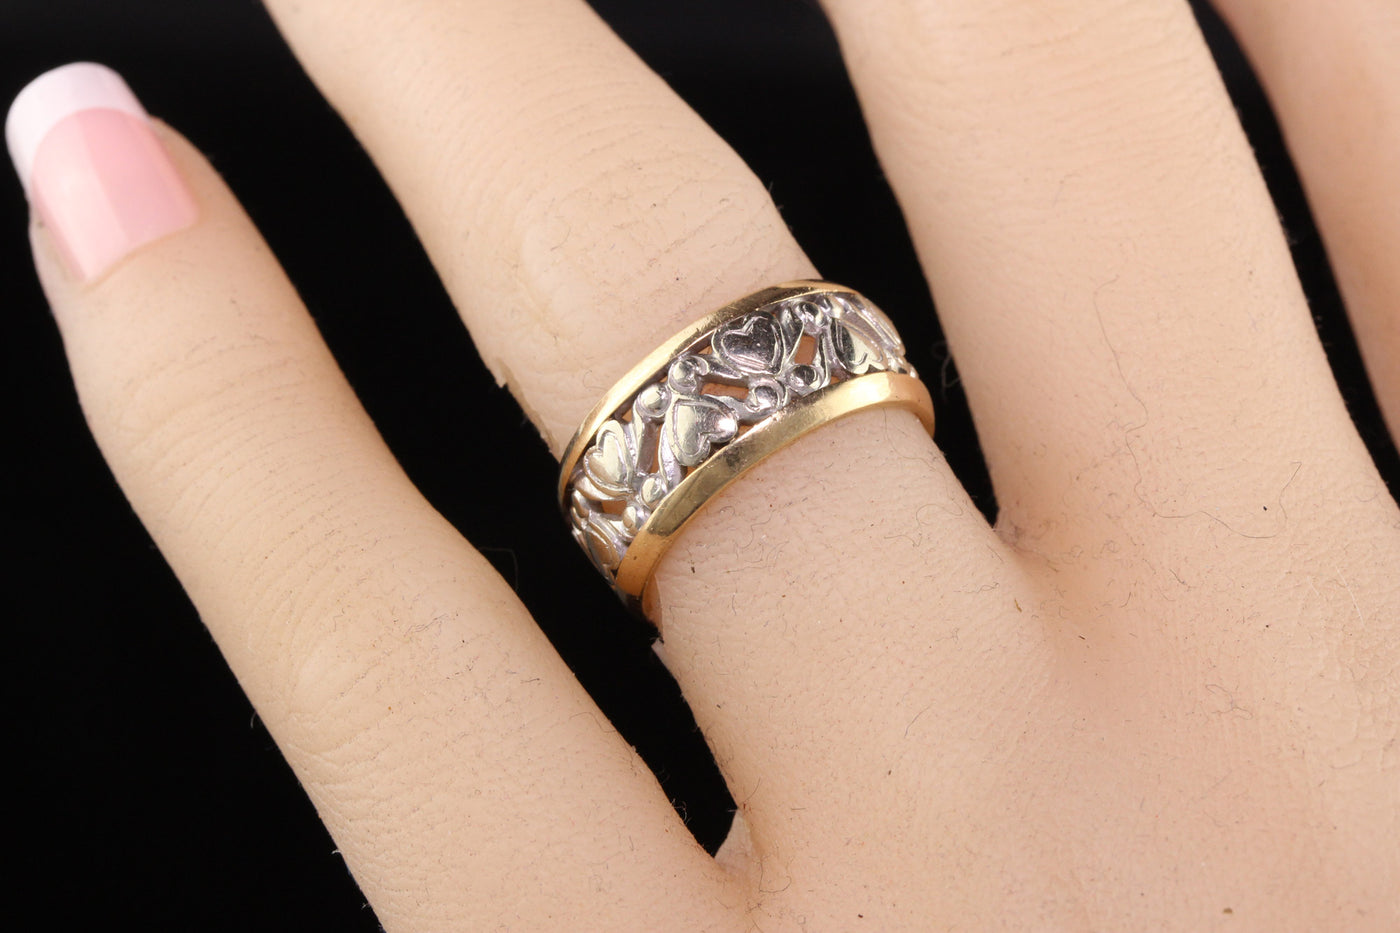 Antique Art Deco 14K White and Yellow Gold Wide Heart Wedding Band